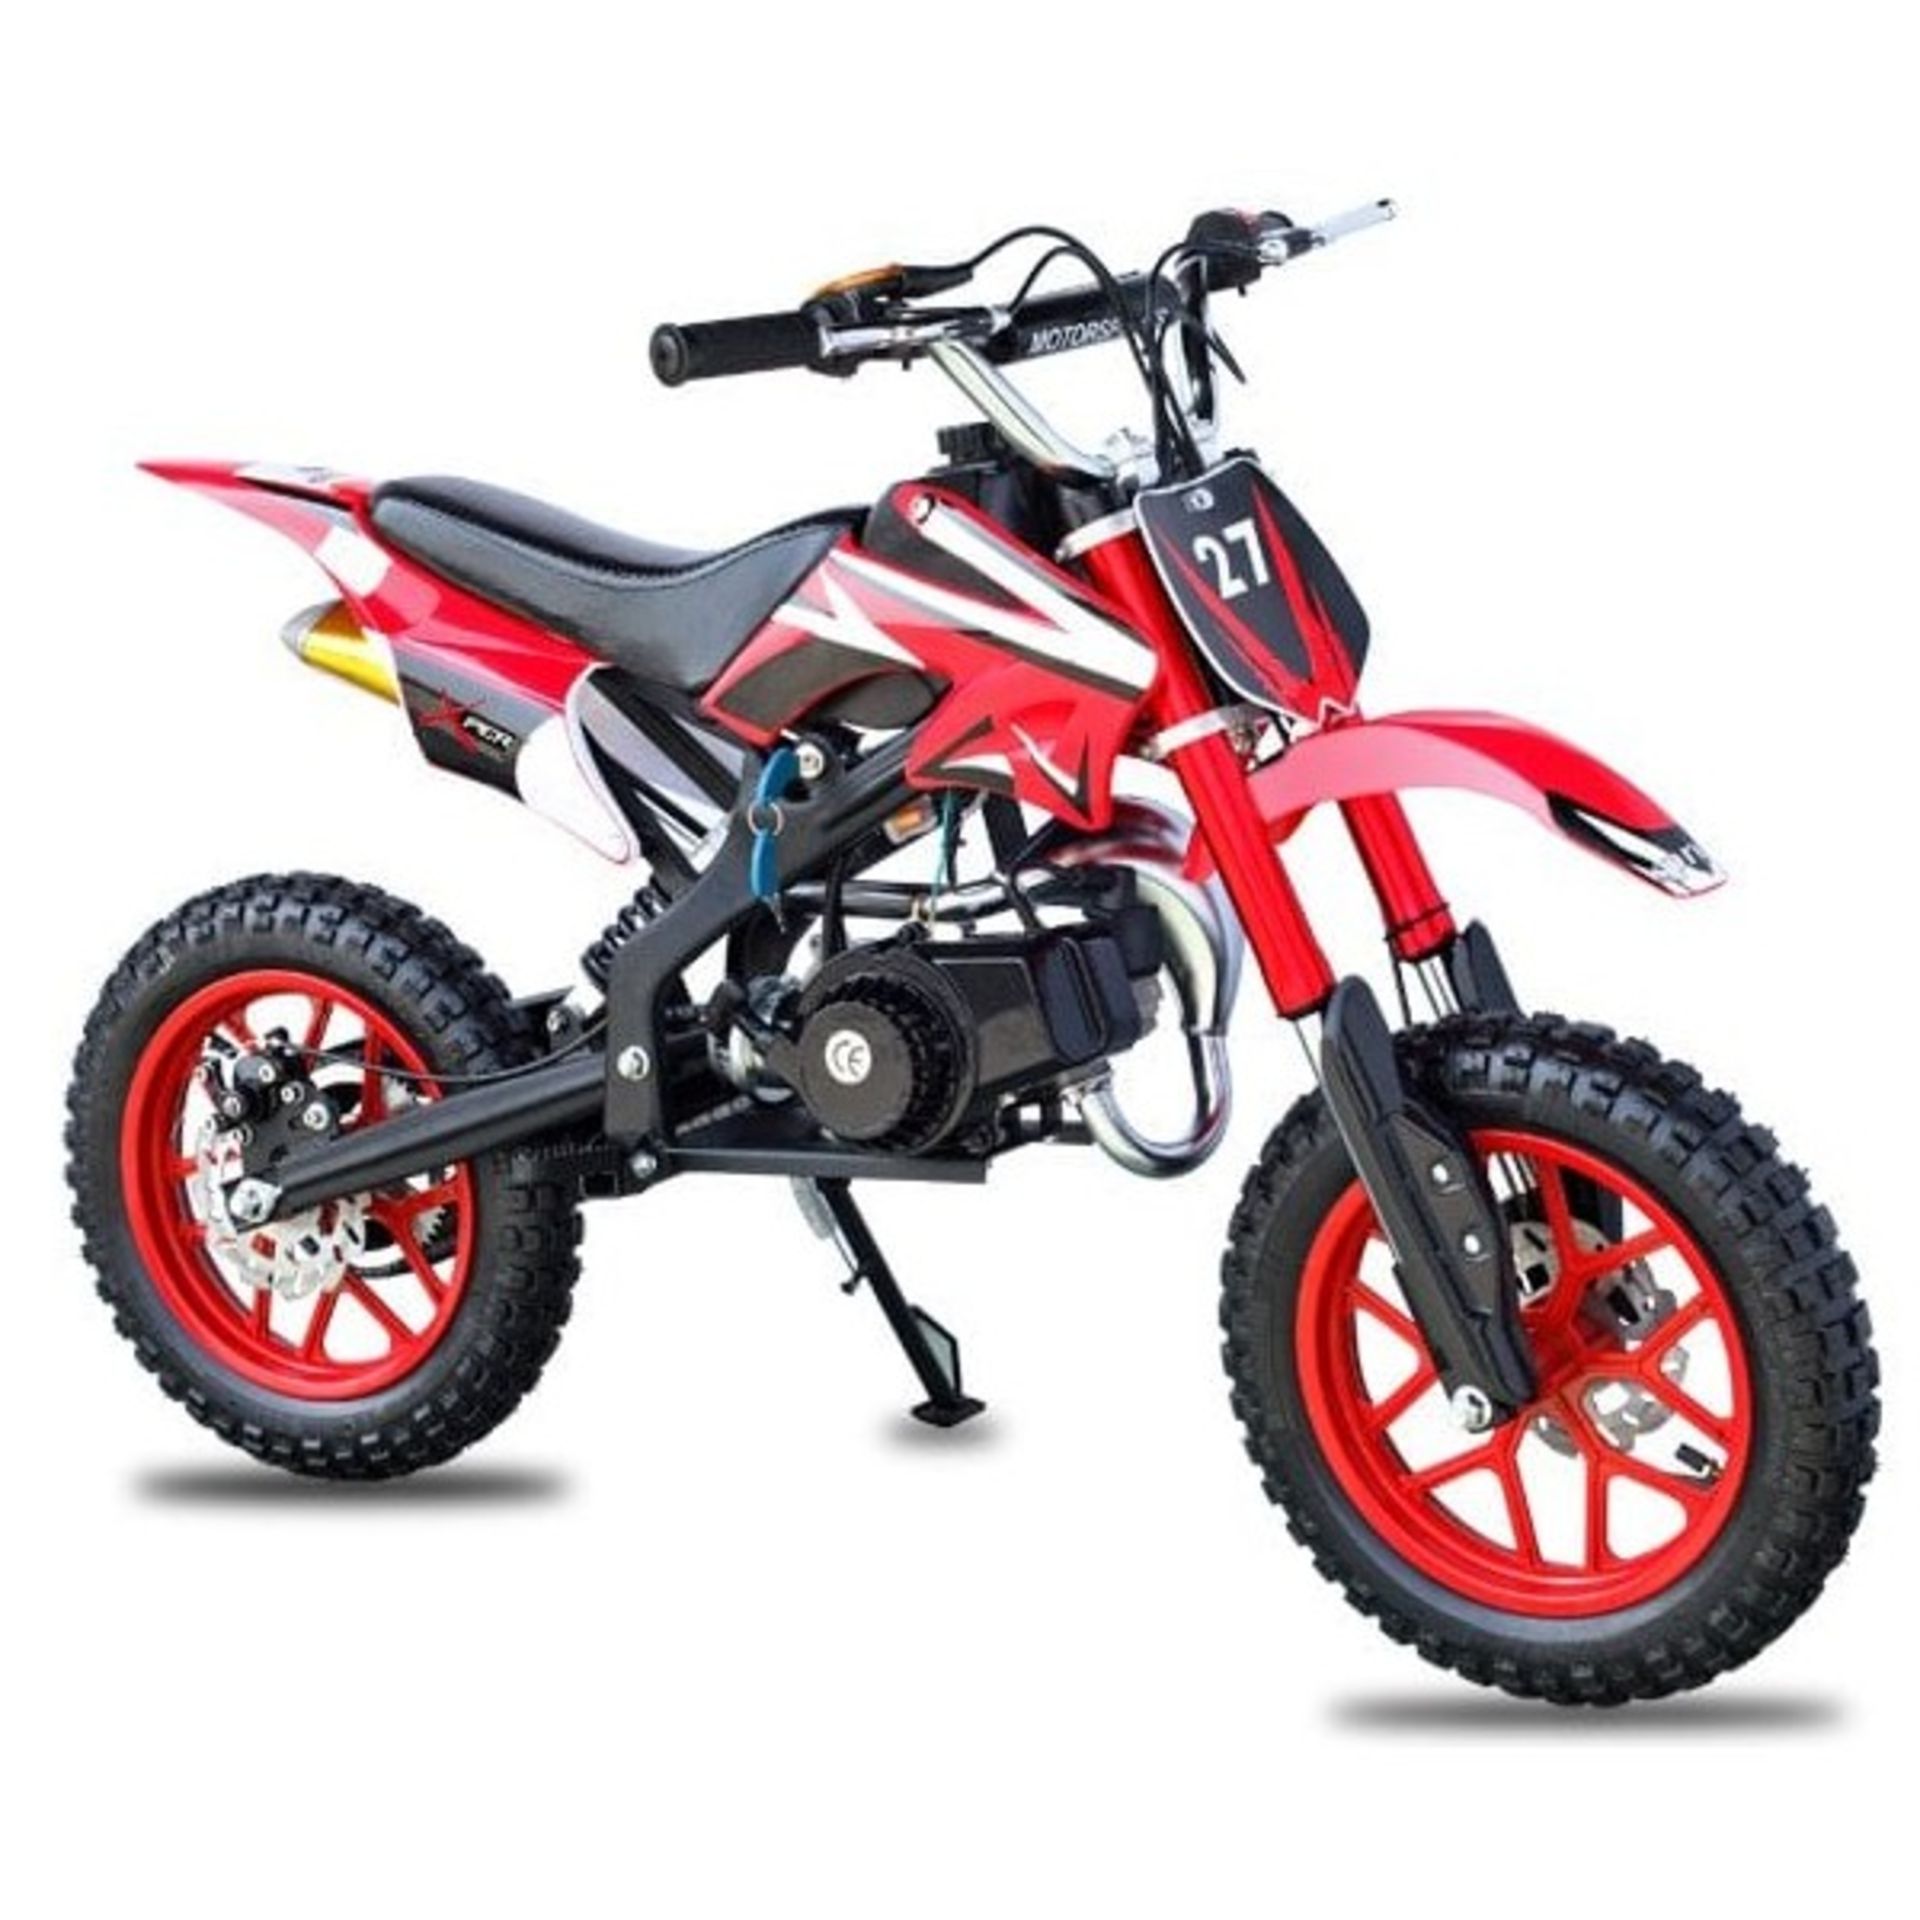 V Brand New 50cc Delta Mini Bike - Colour May Vary - Two Stroke - Single Cylinder (Item available - Image 2 of 3